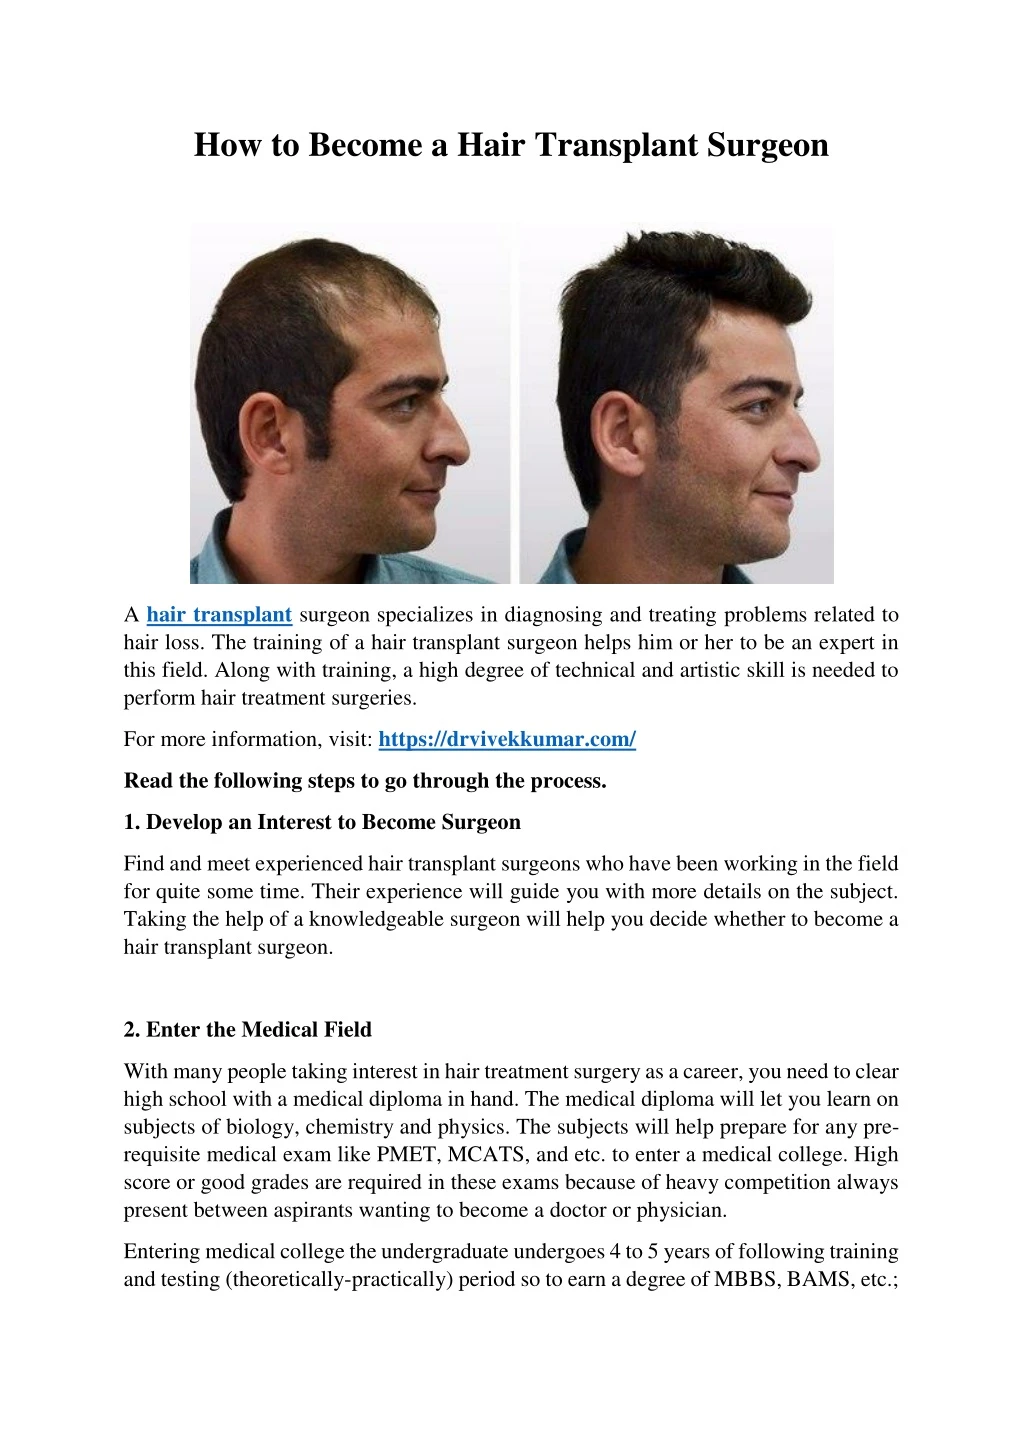 how to become a hair transplant surgeon